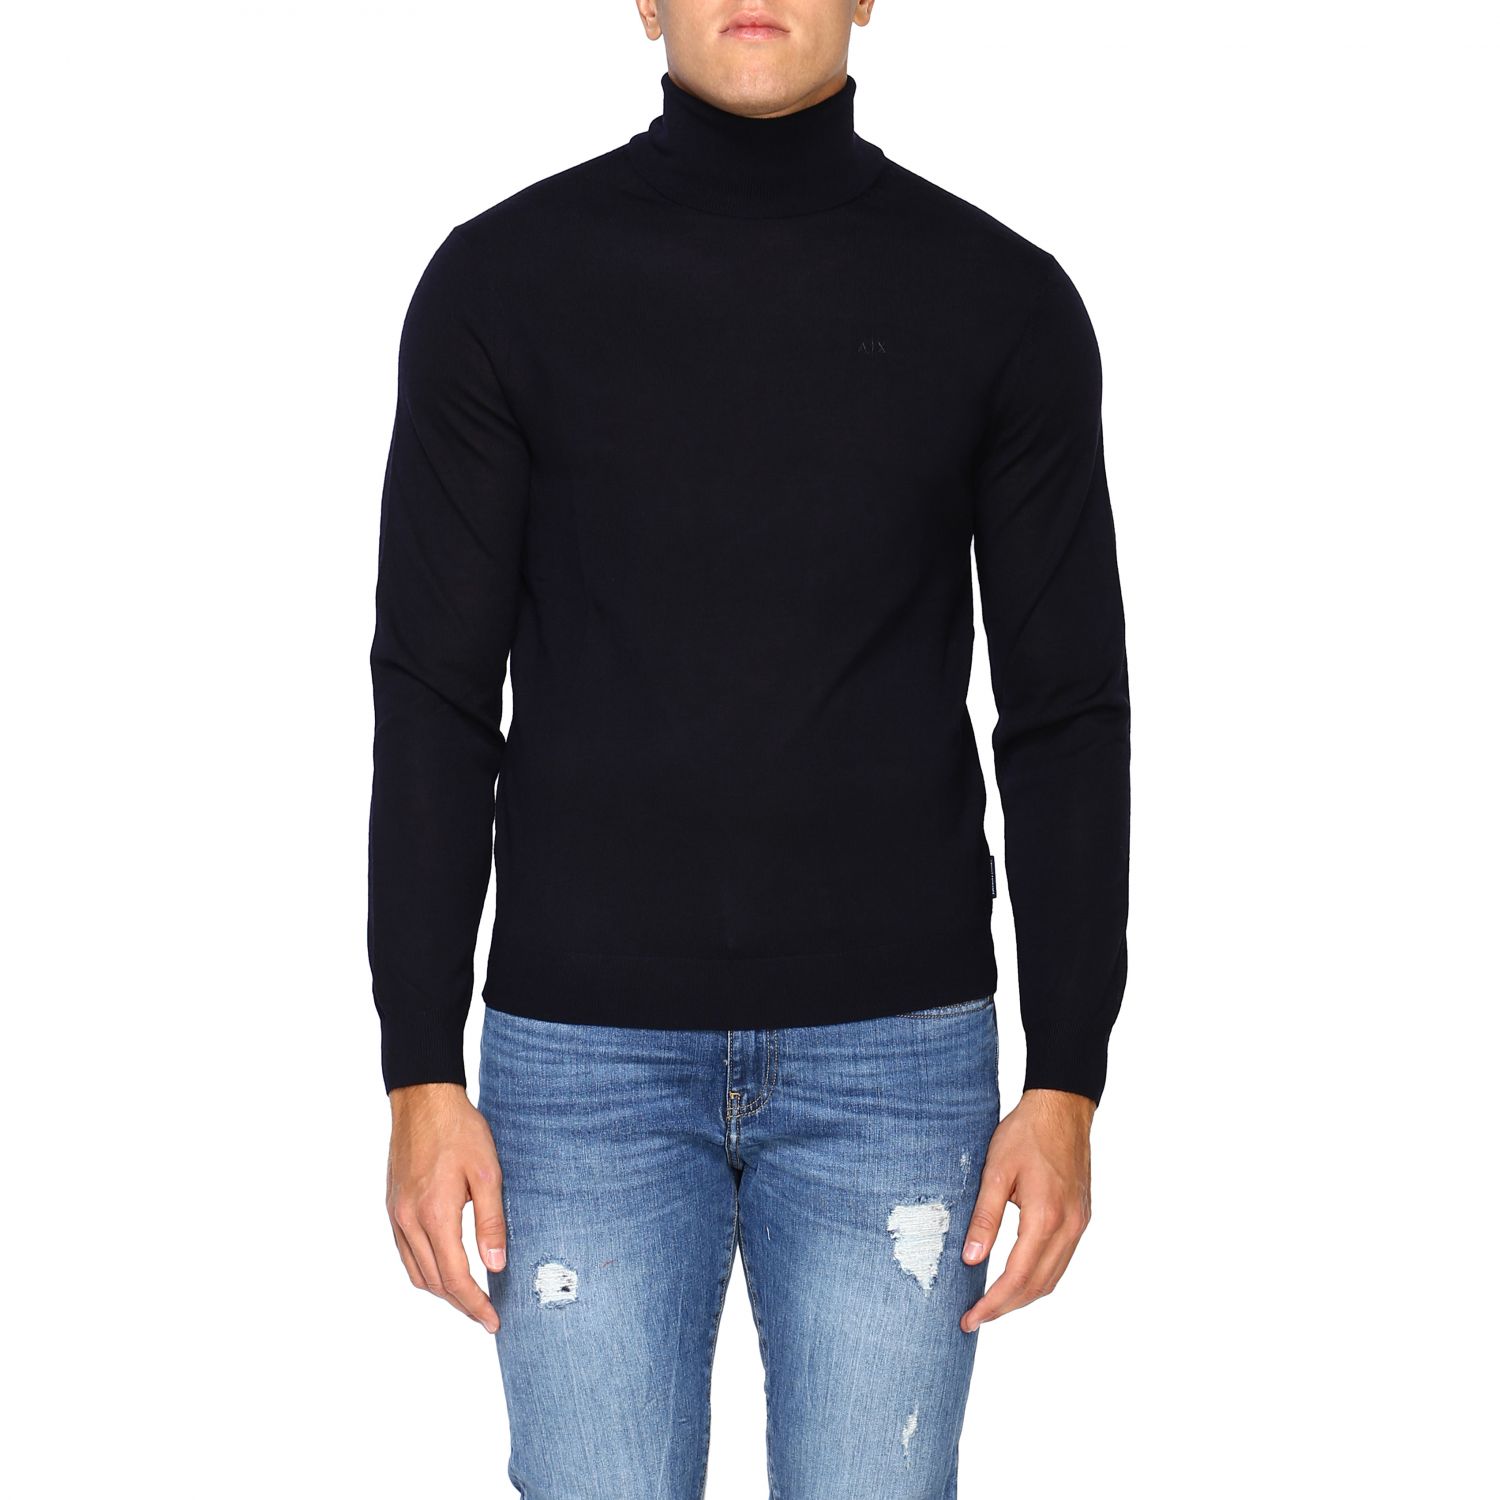 Armani Exchange Outlet: sweater for man - Blue | Armani Exchange ...